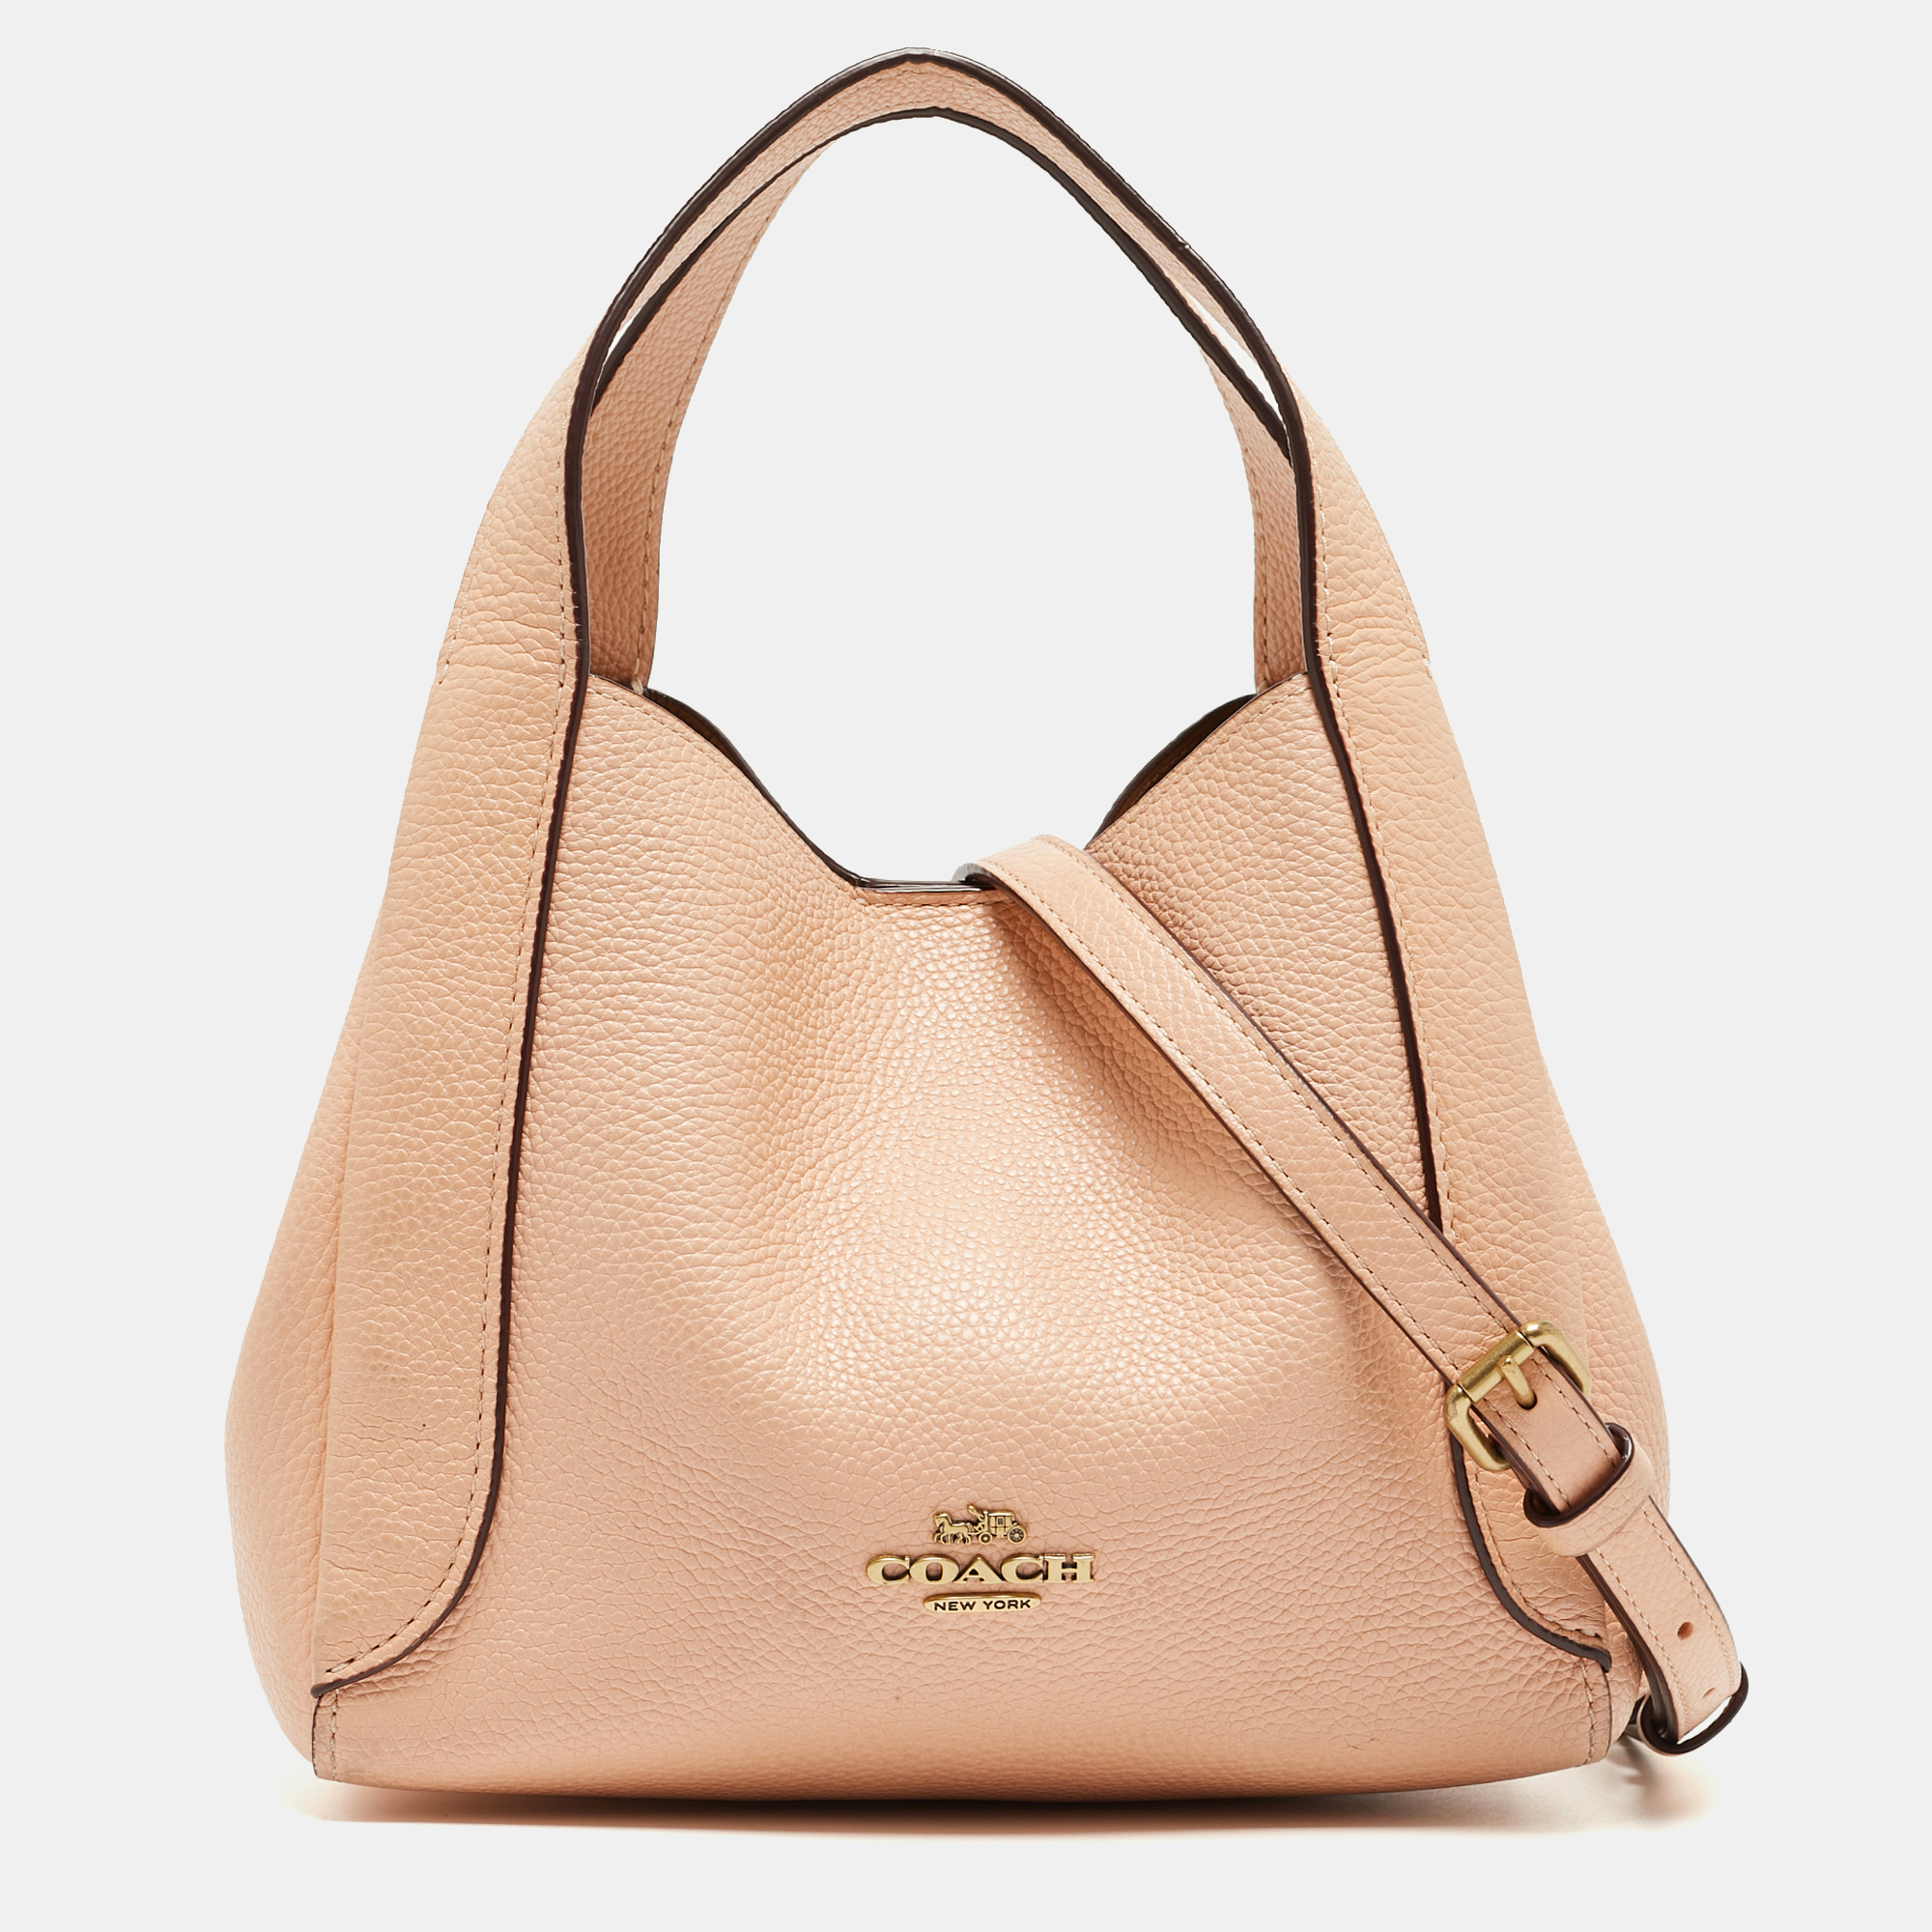 Fashion meets function; this Coach hobo is the ideal everyday piece thatll take you from desk to drinks in a jiffy. It boasts a durable exterior and is a wardrobe must have.